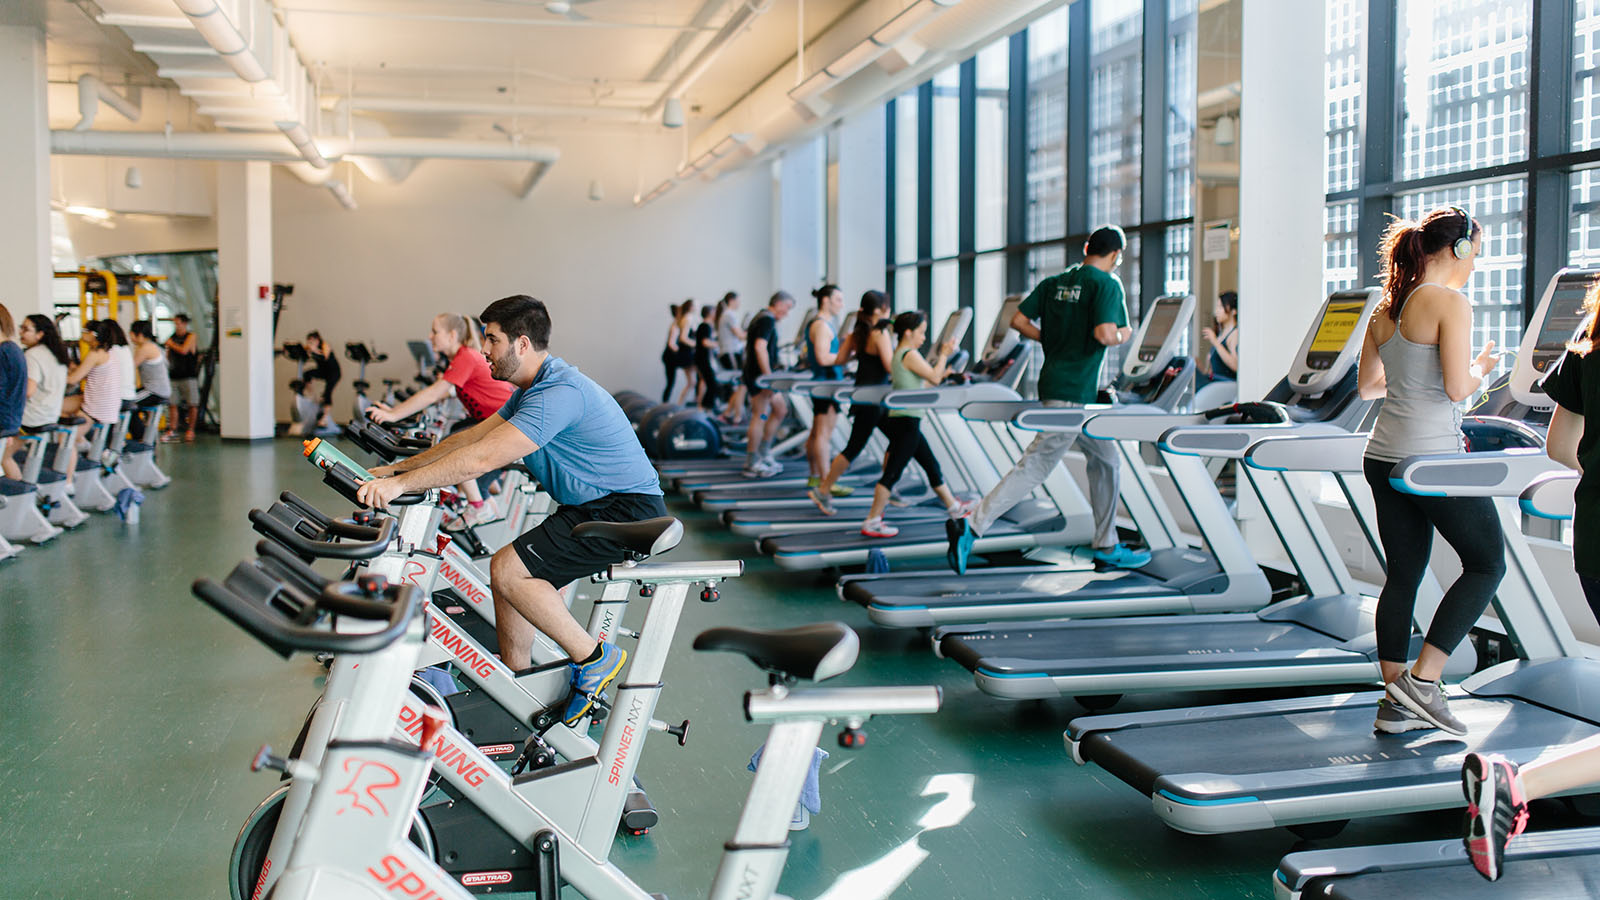 Members of the university community exercising at the Hanson Fitness &amp; Lifestyle Centre